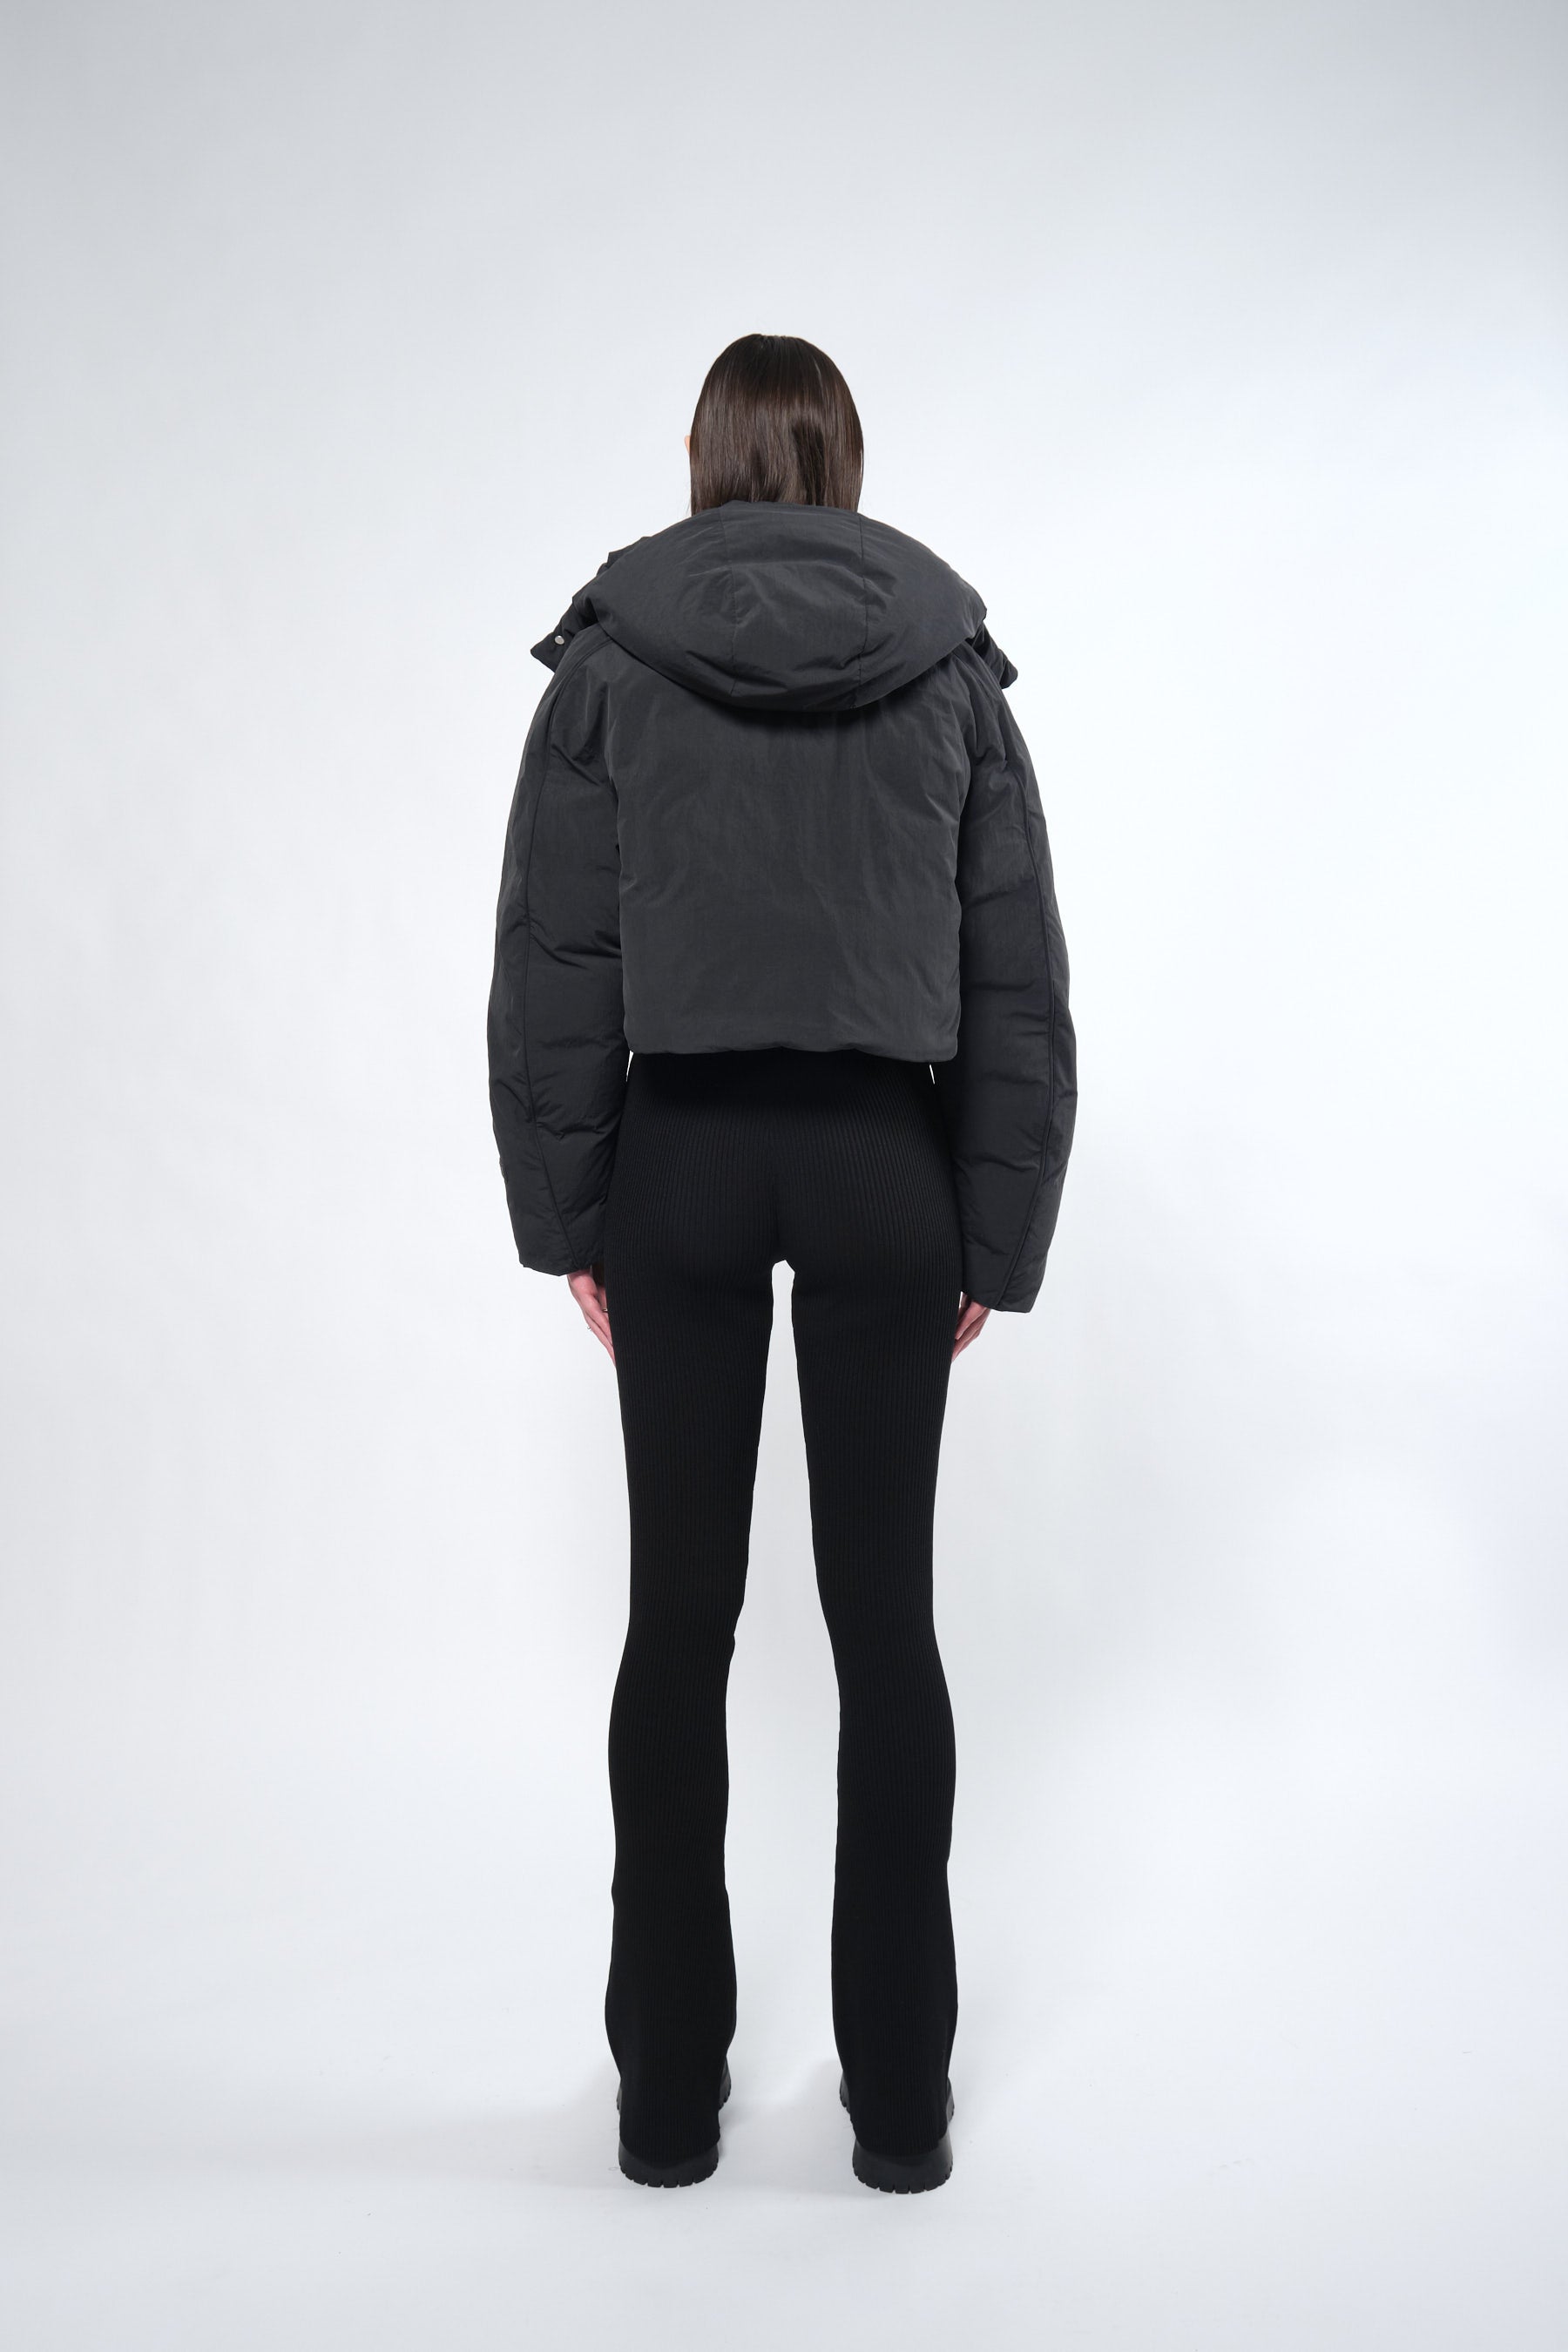  Re:Down® Crop Black Puffer Jacket with Hood - Adhere To  - 8